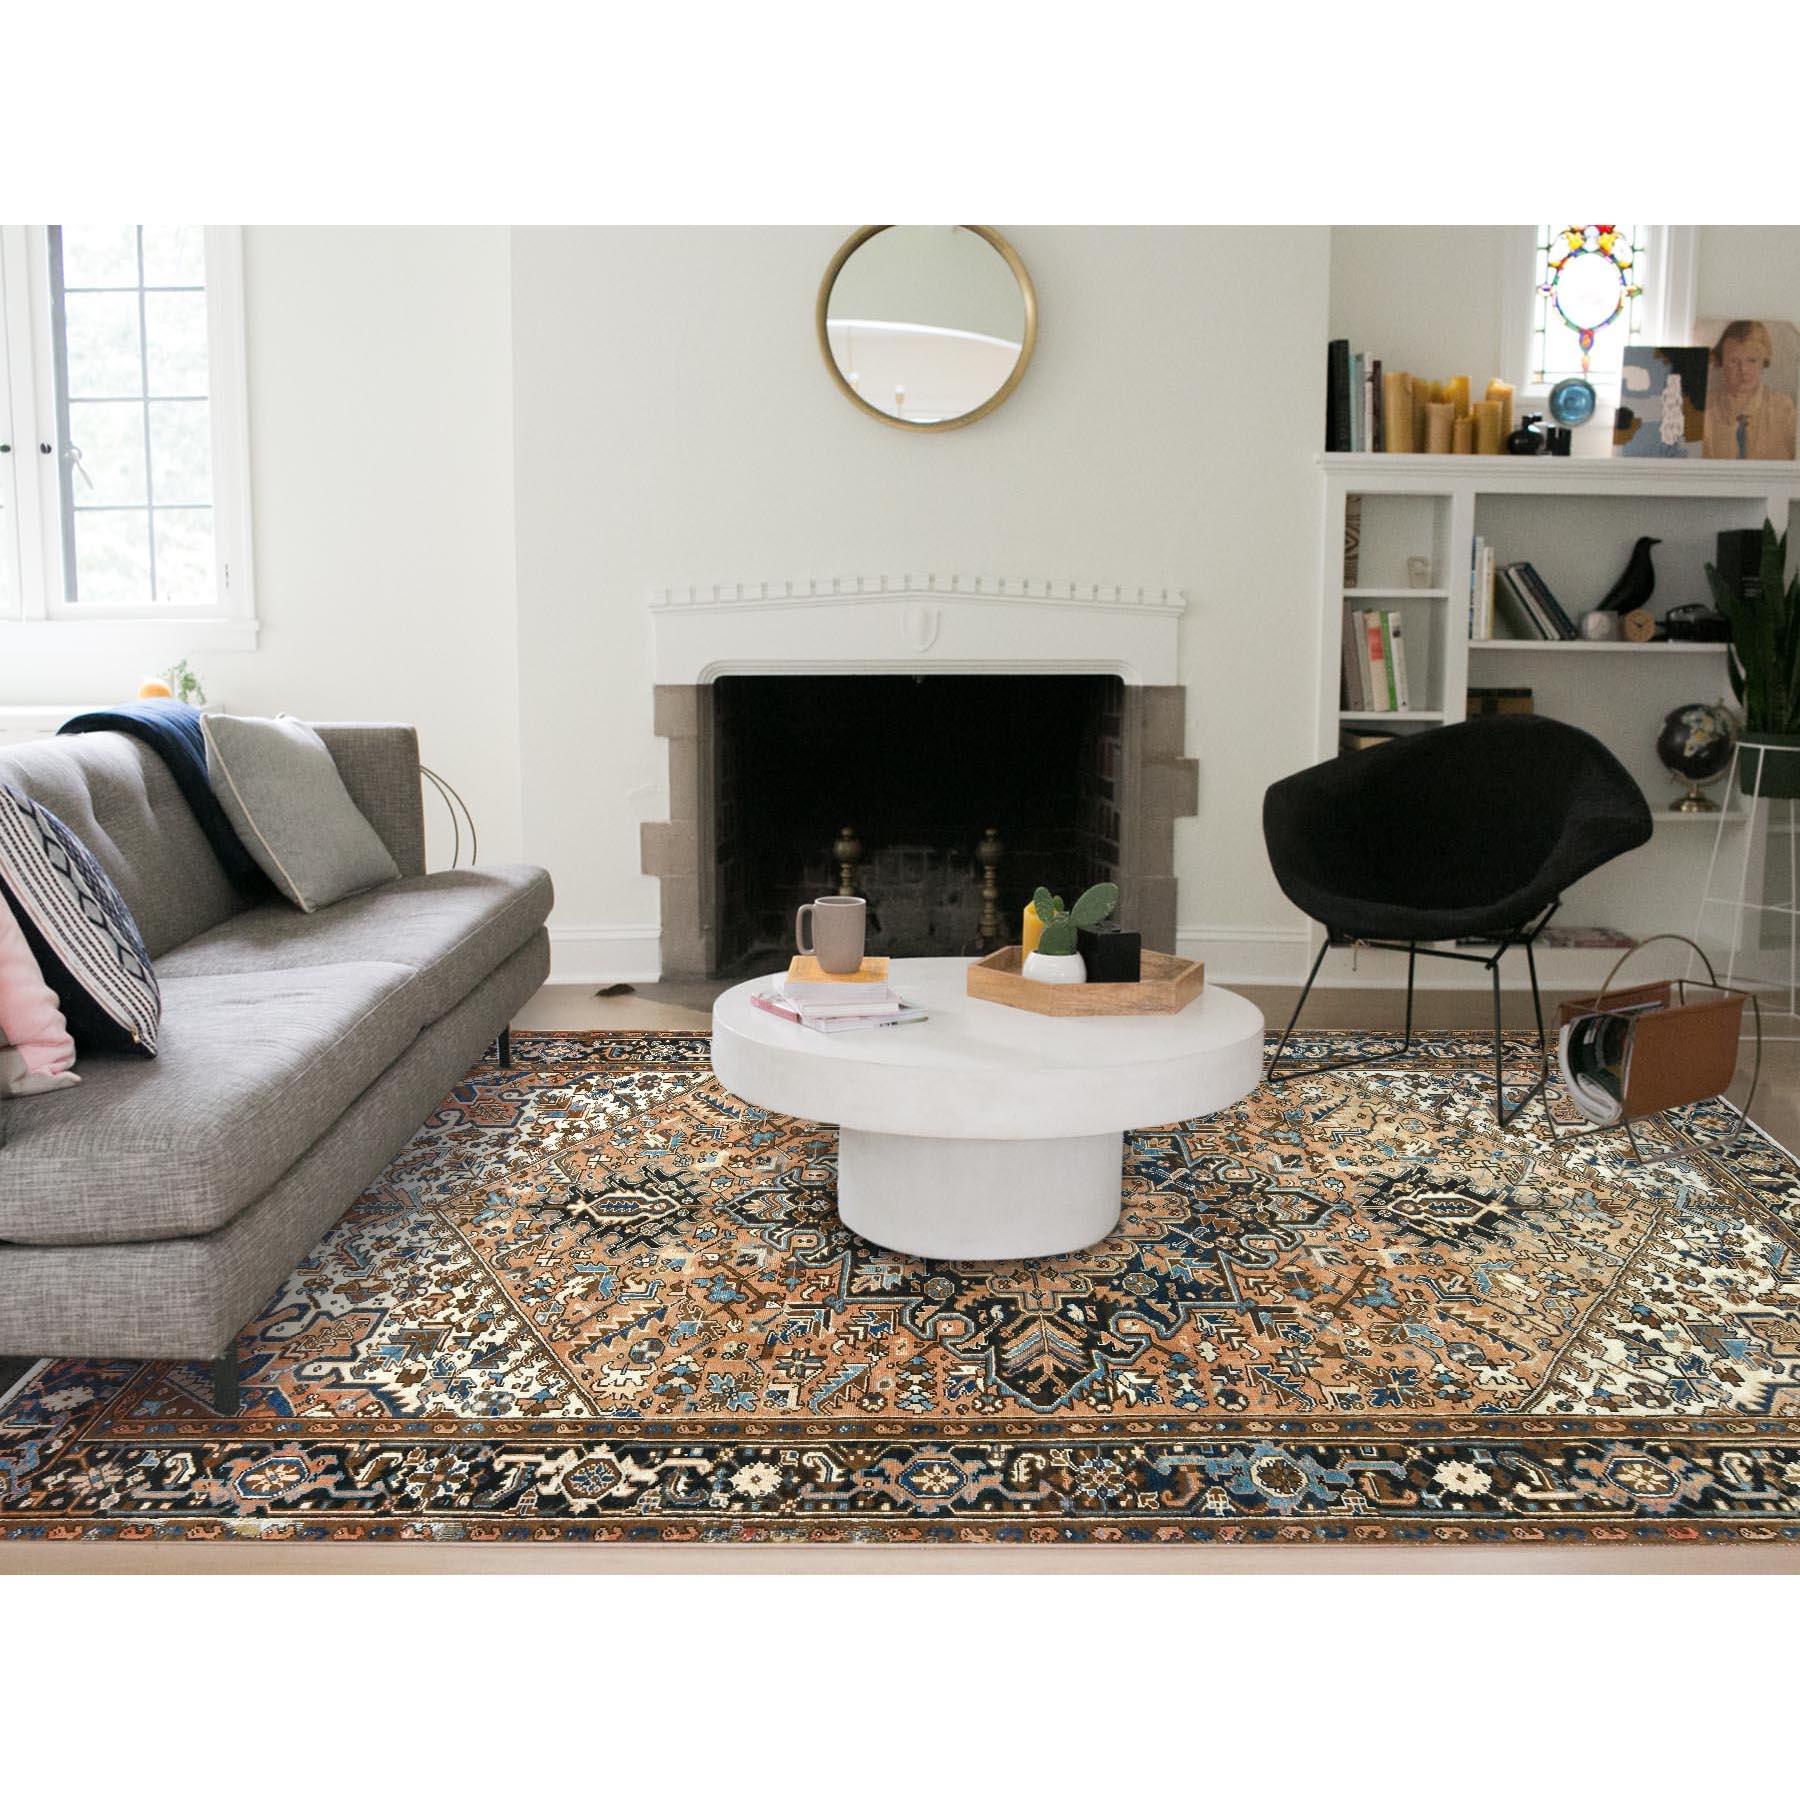 This fabulous Hand-Knotted carpet has been created and designed for extra strength and durability. This rug has been handcrafted for weeks in the traditional method that is used to makeExact Rug Size in Feet and Inches : 7'10